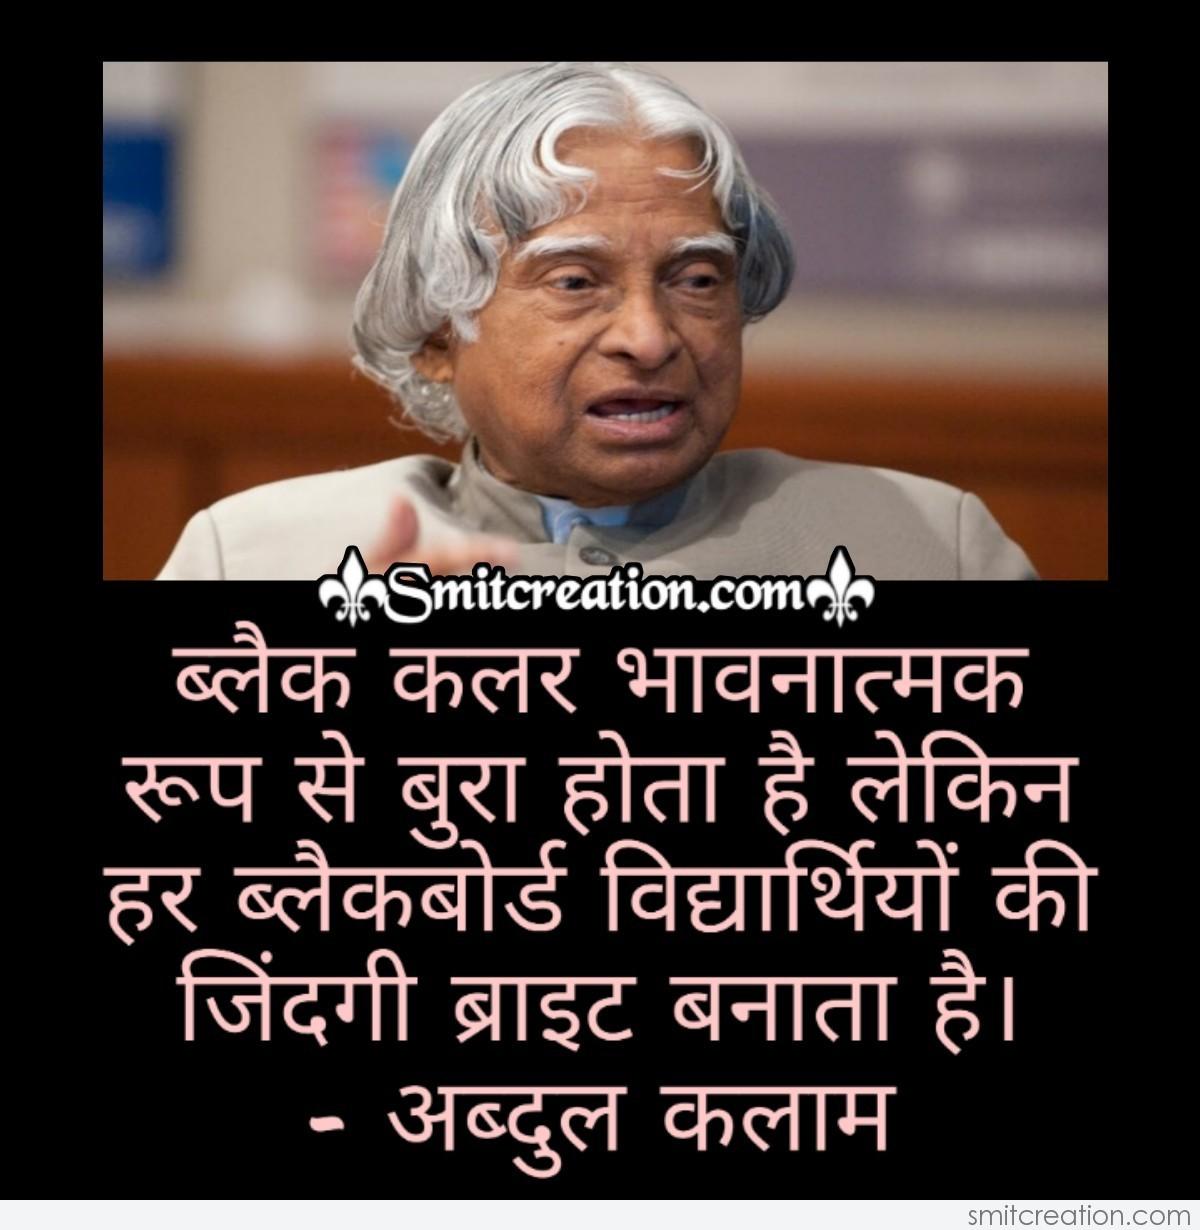 Abdul Kalam Quote In Hindi For Students - SmitCreation.com